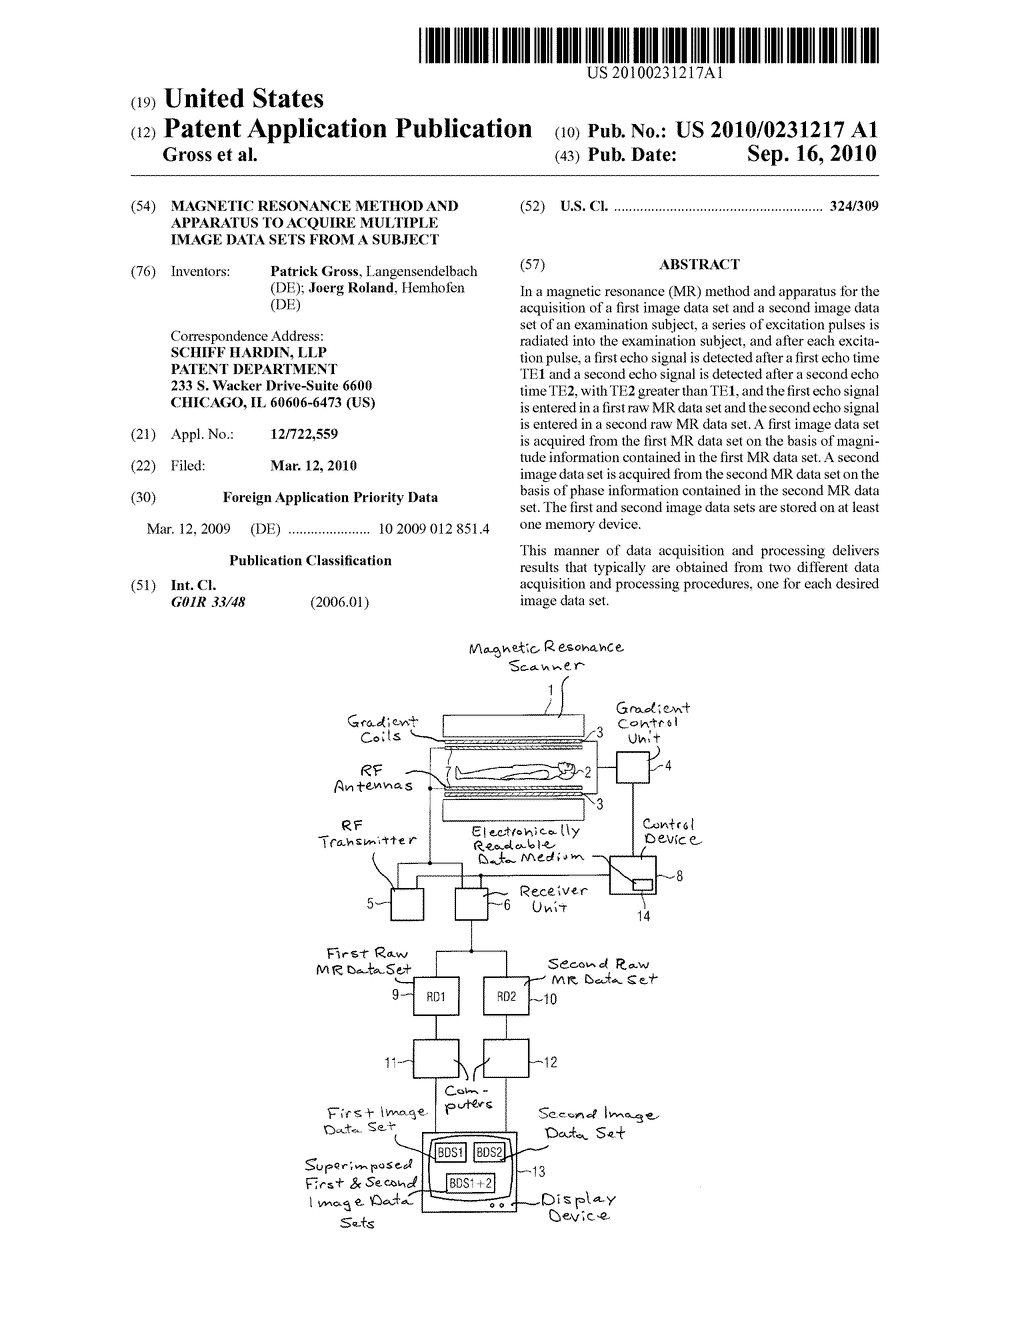 MAGNETIC RESONANCE METHOD AND APPARATUS TO ACQUIRE MULTIPLE IMAGE DATA SETS FROM A SUBJECT - diagram, schematic, and image 01